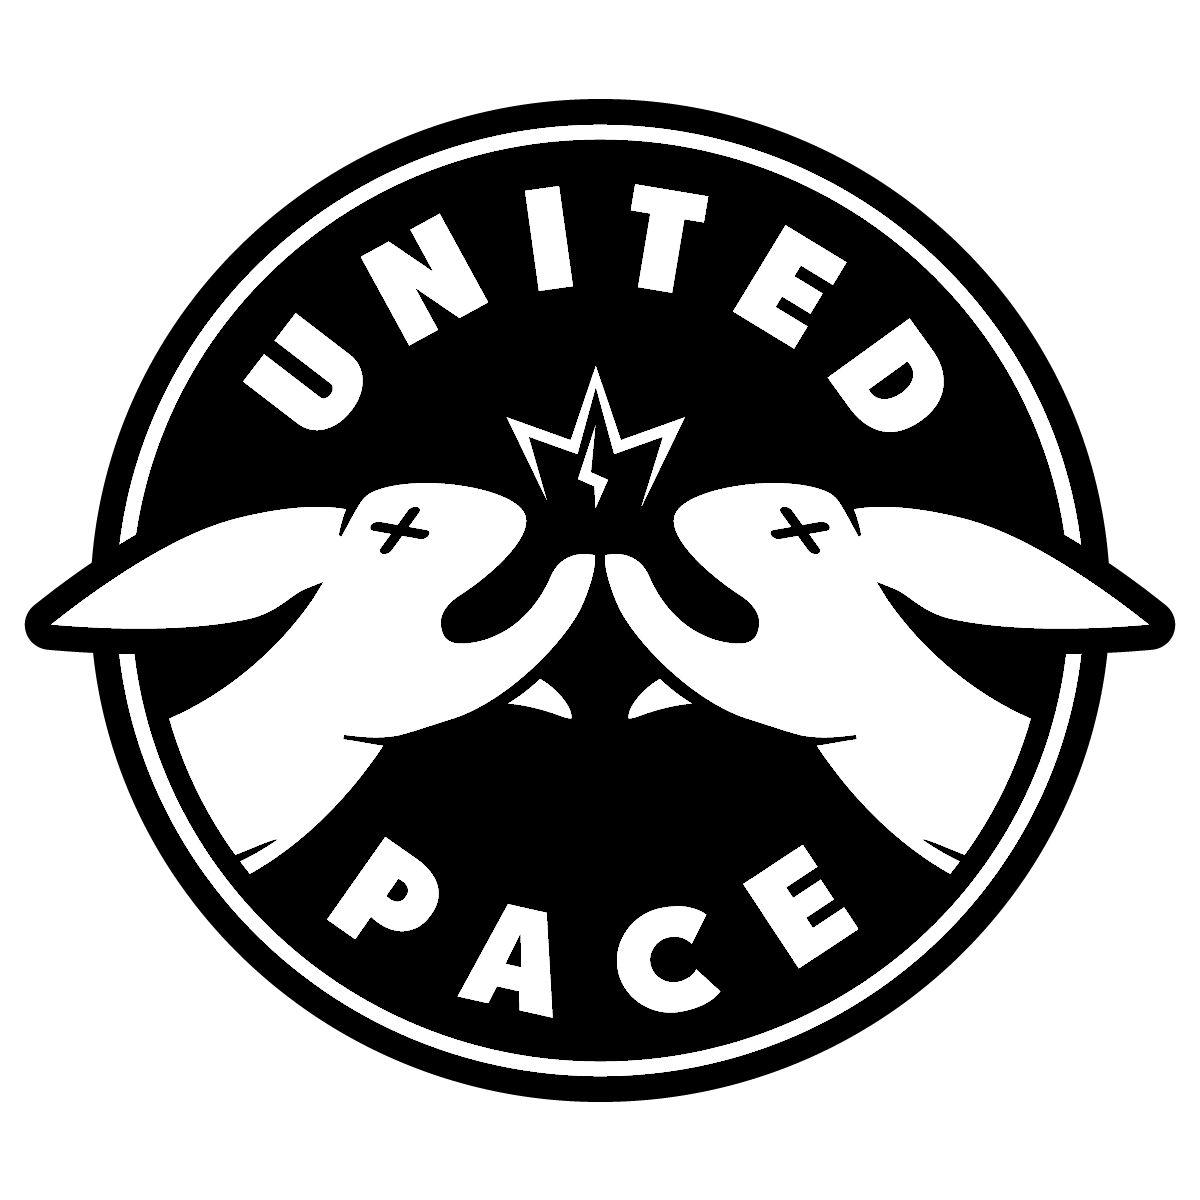 United pace